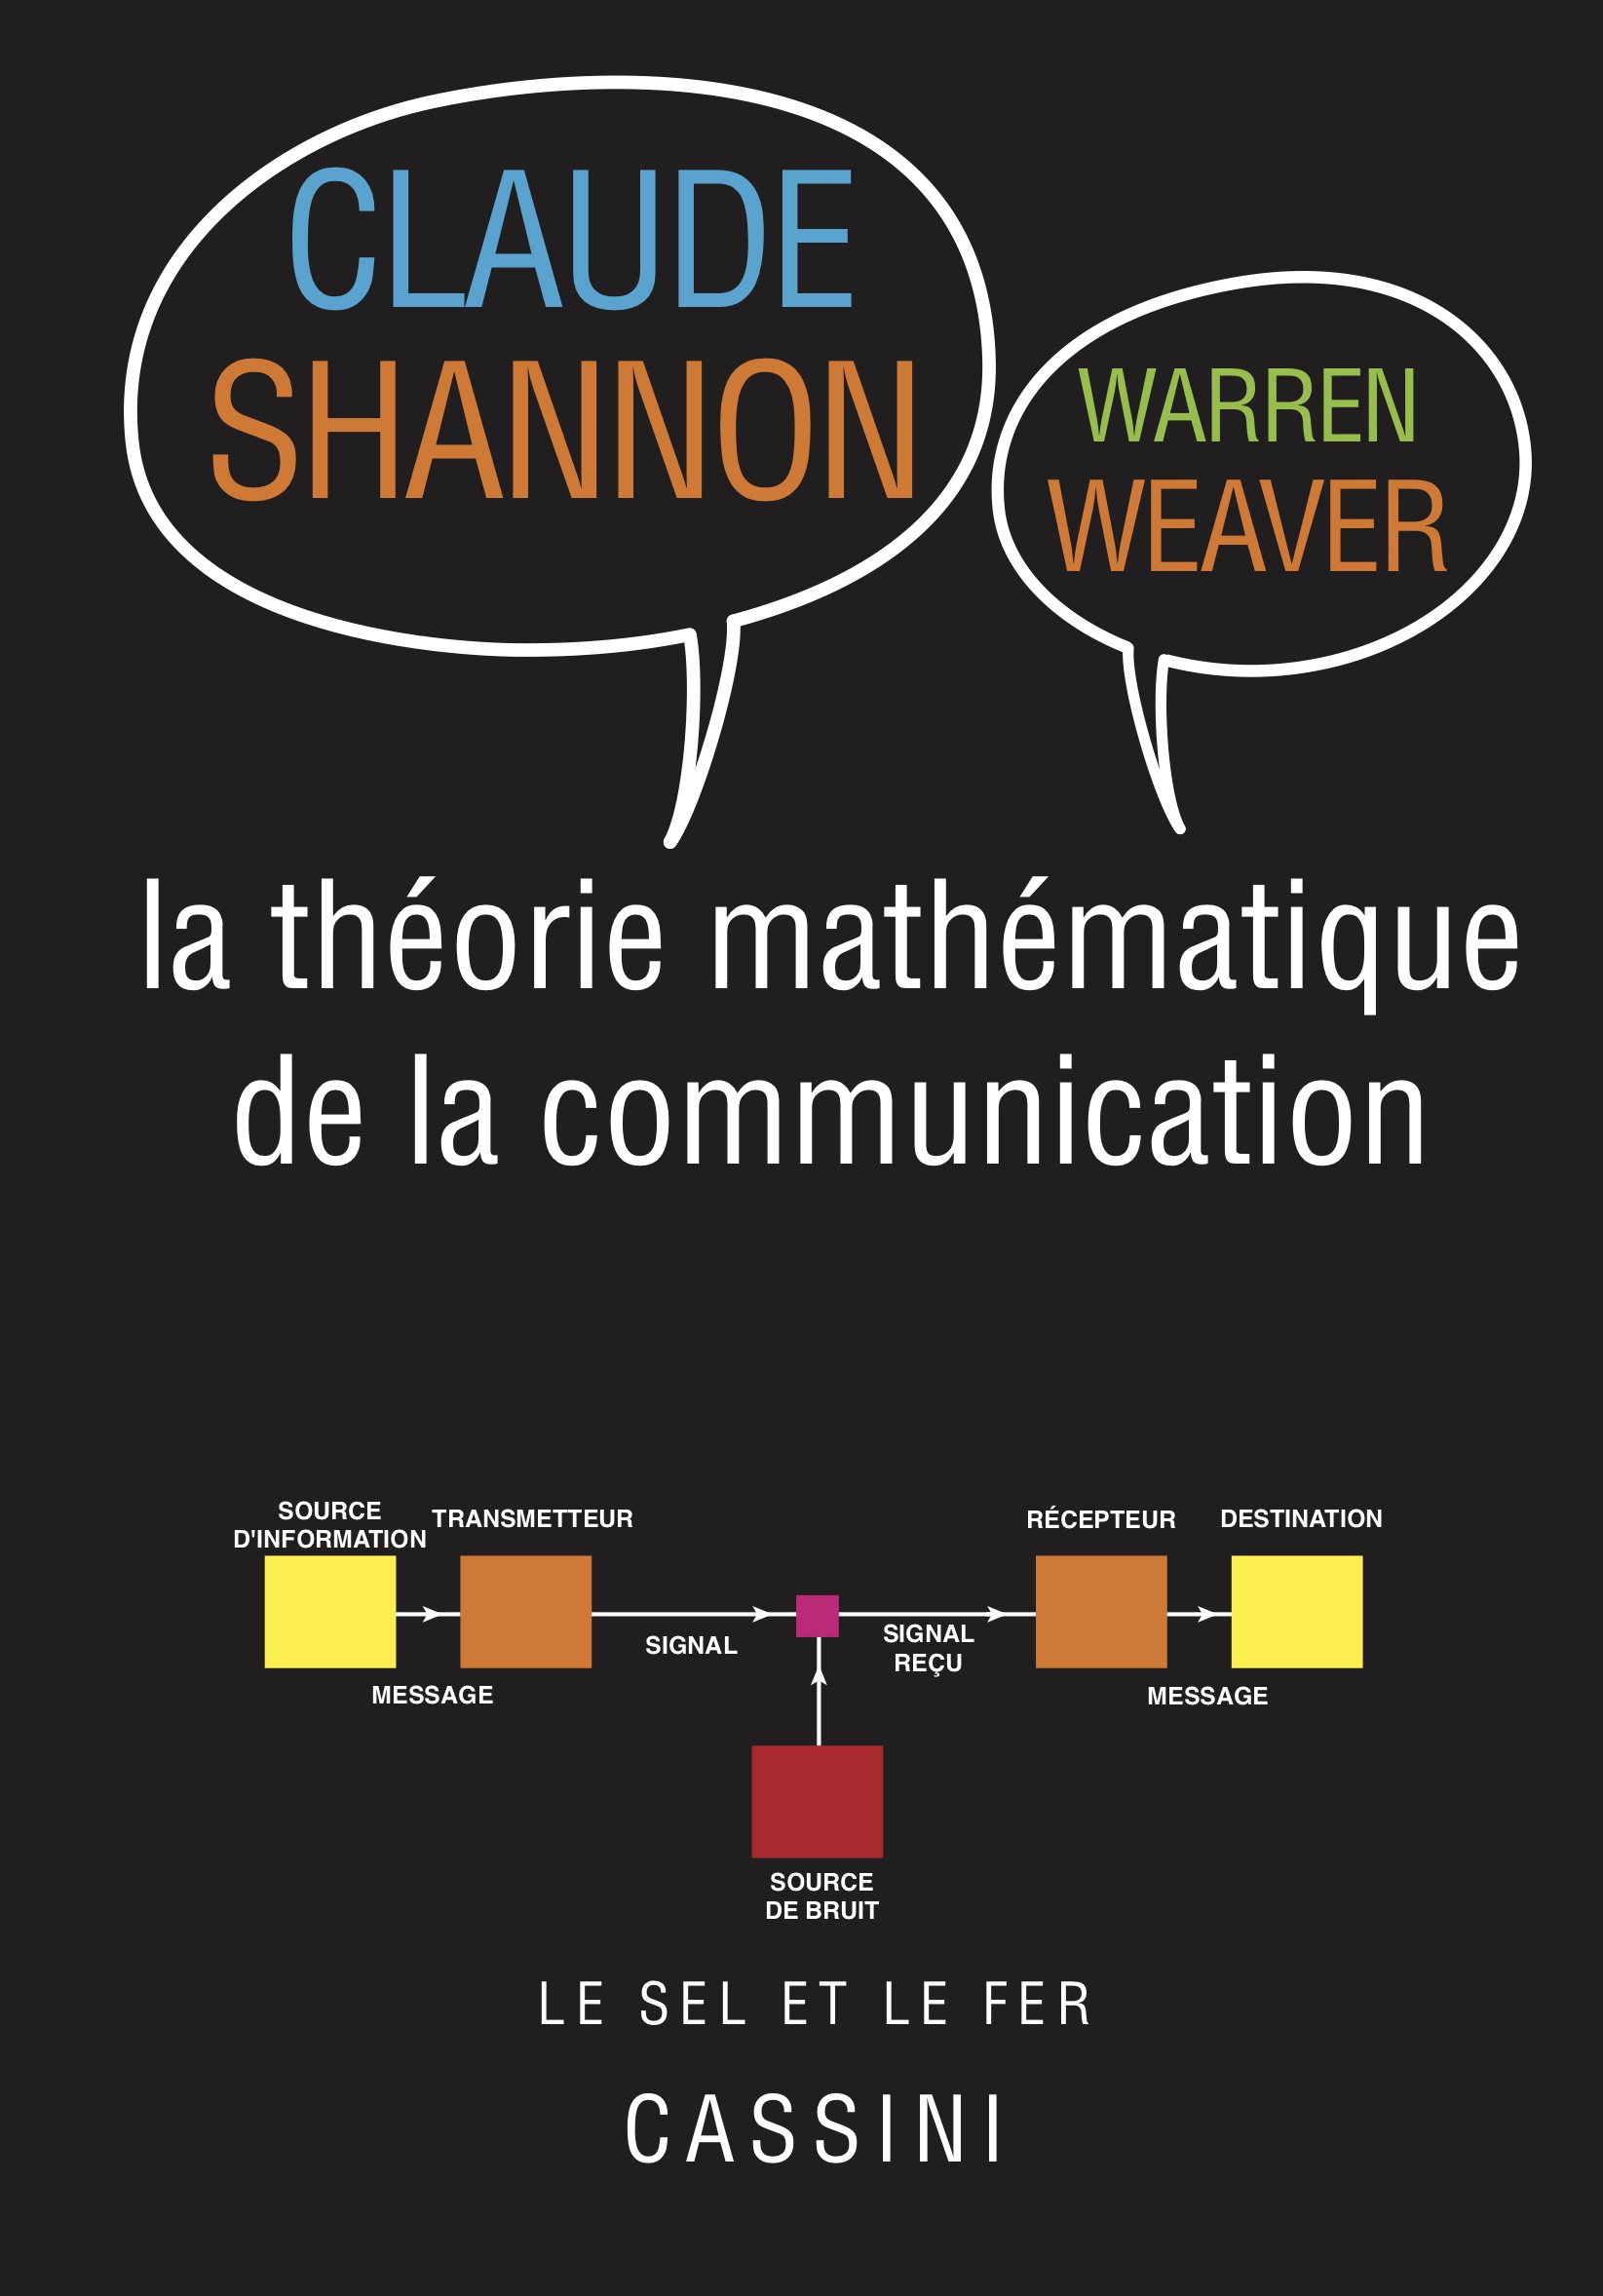 couverture livre theorie info